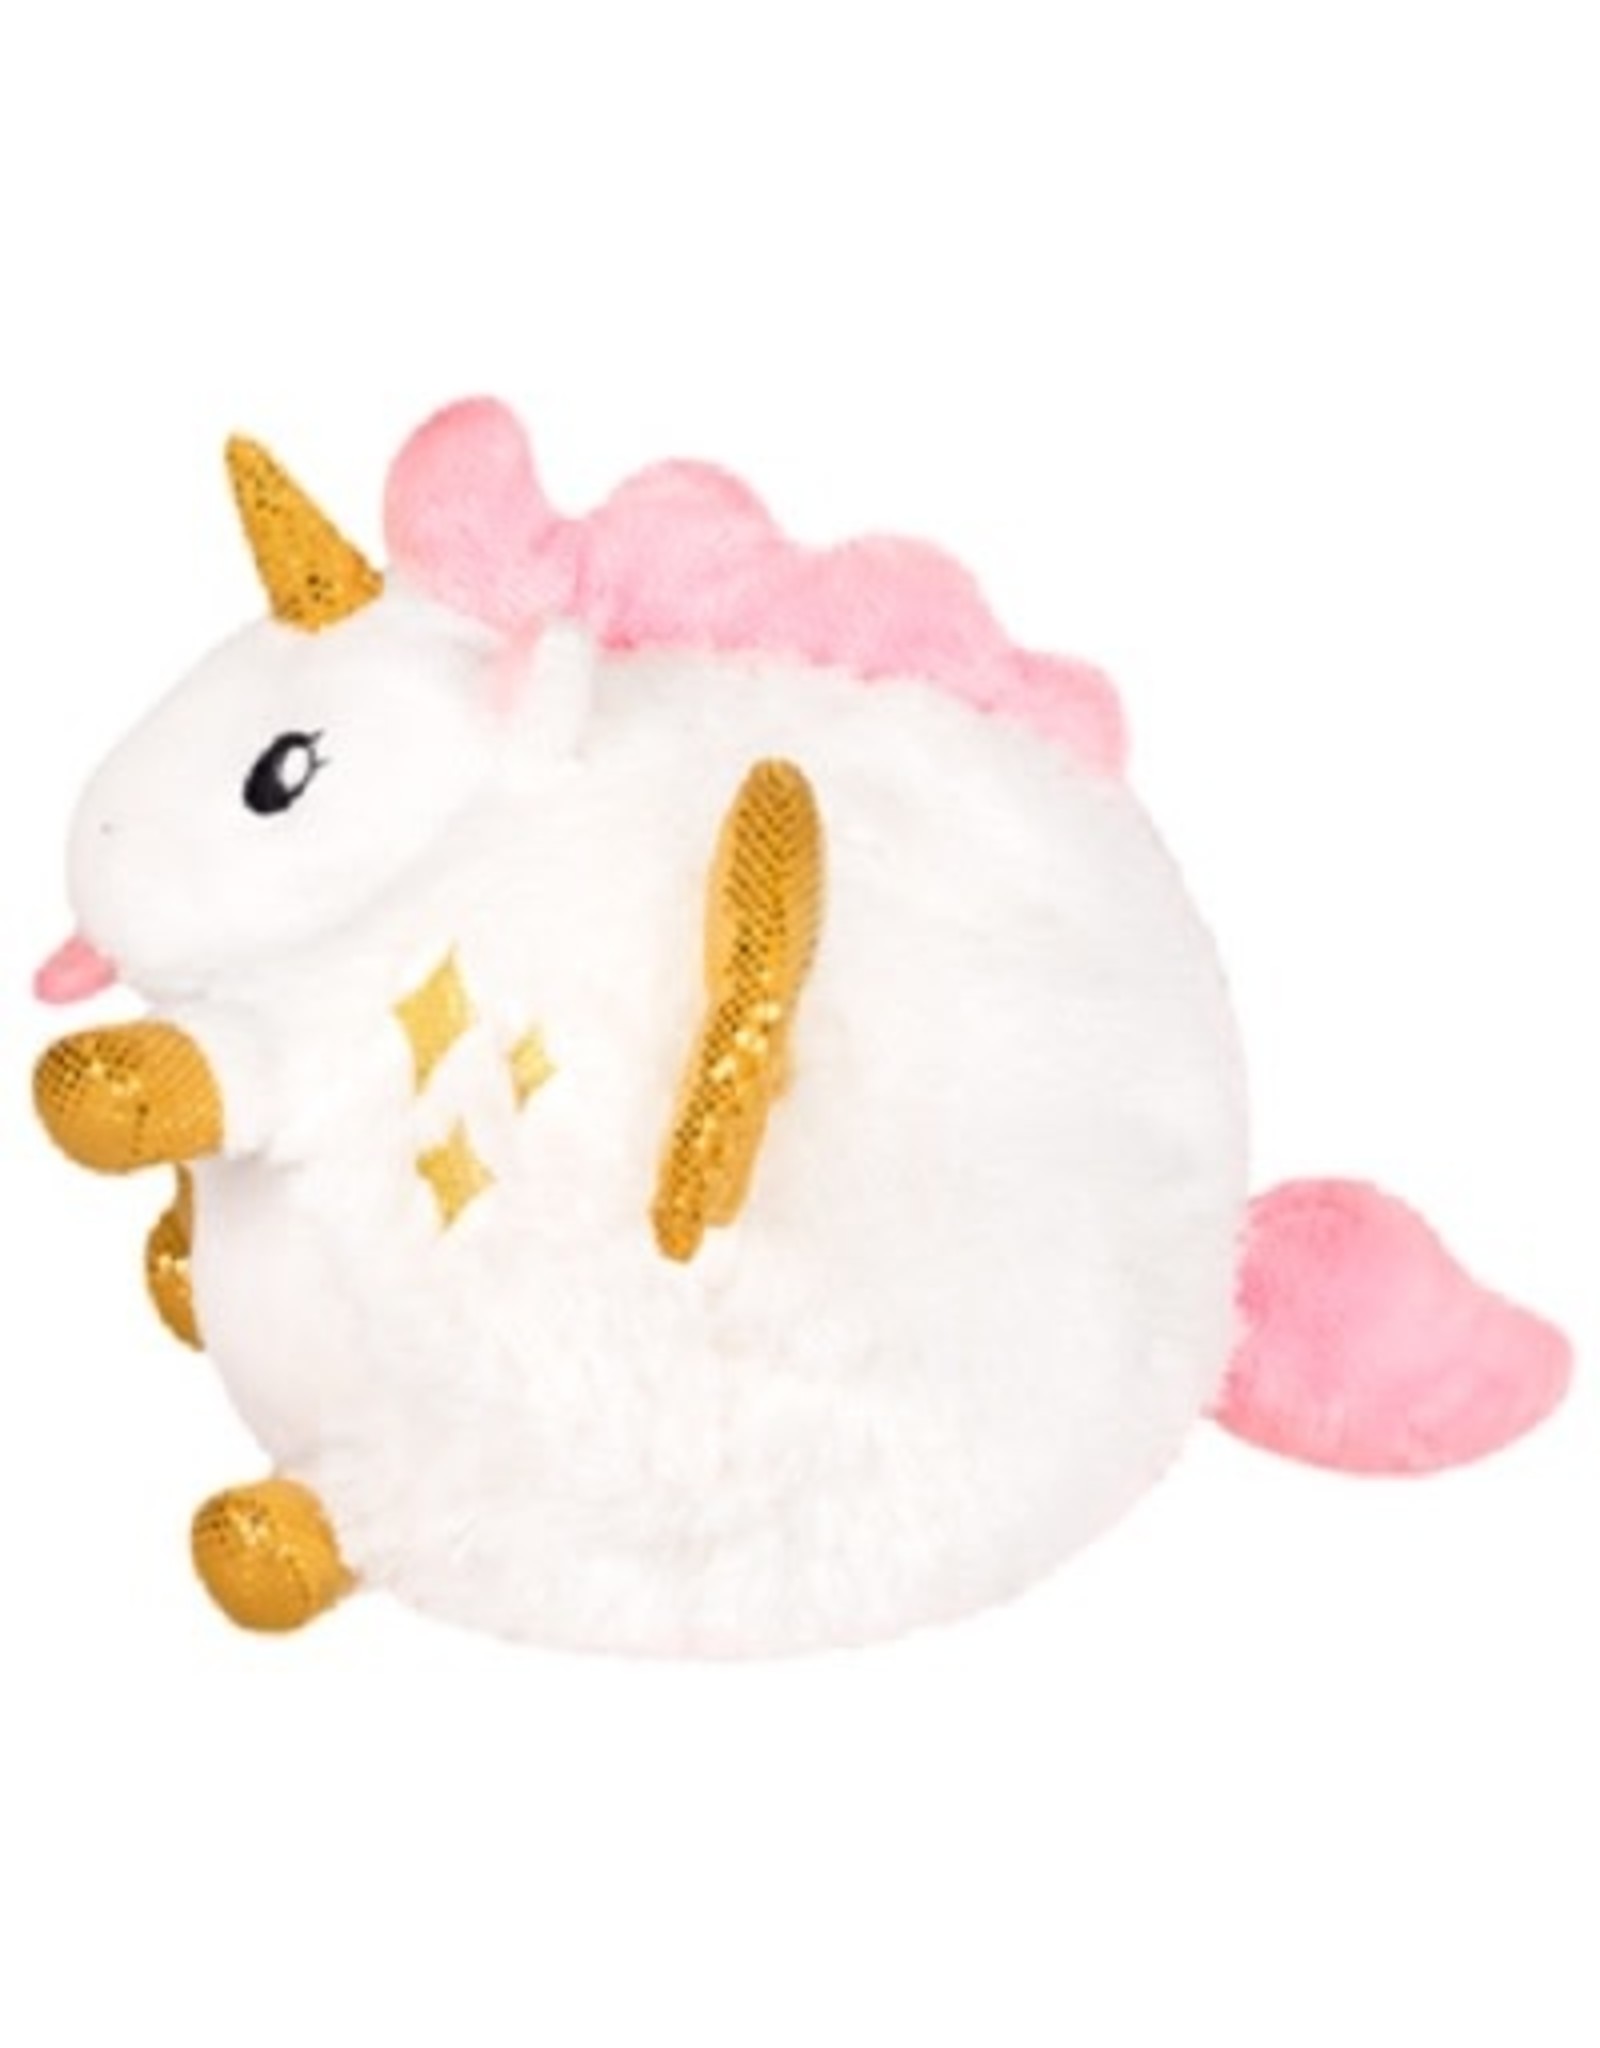 Children’s Unicorn Soft Toys Squishable Squeezable Characters  Soft Microbead 